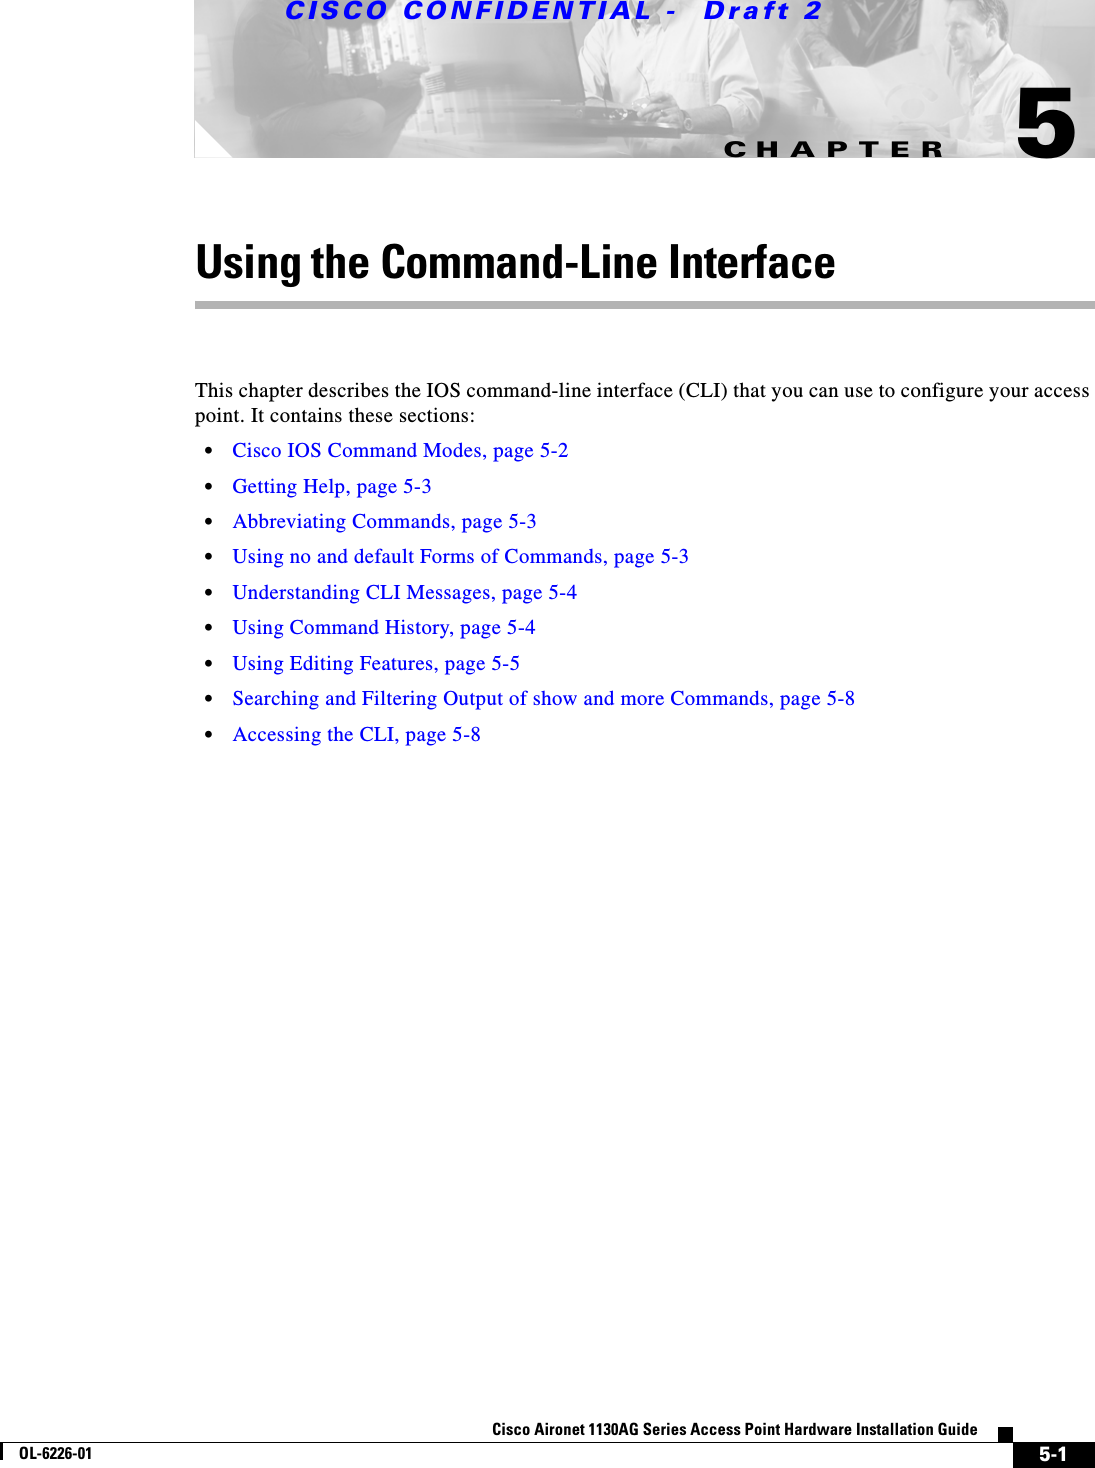 CHAPTER CISCO CONFIDENTIAL -  Draft 25-1Cisco Aironet 1130AG Series Access Point Hardware Installation GuideOL-6226-015Using the Command-Line InterfaceThis chapter describes the IOS command-line interface (CLI) that you can use to configure your access point. It contains these sections:•Cisco IOS Command Modes, page 5-2•Getting Help, page 5-3•Abbreviating Commands, page 5-3•Using no and default Forms of Commands, page 5-3•Understanding CLI Messages, page 5-4•Using Command History, page 5-4•Using Editing Features, page 5-5•Searching and Filtering Output of show and more Commands, page 5-8•Accessing the CLI, page 5-8